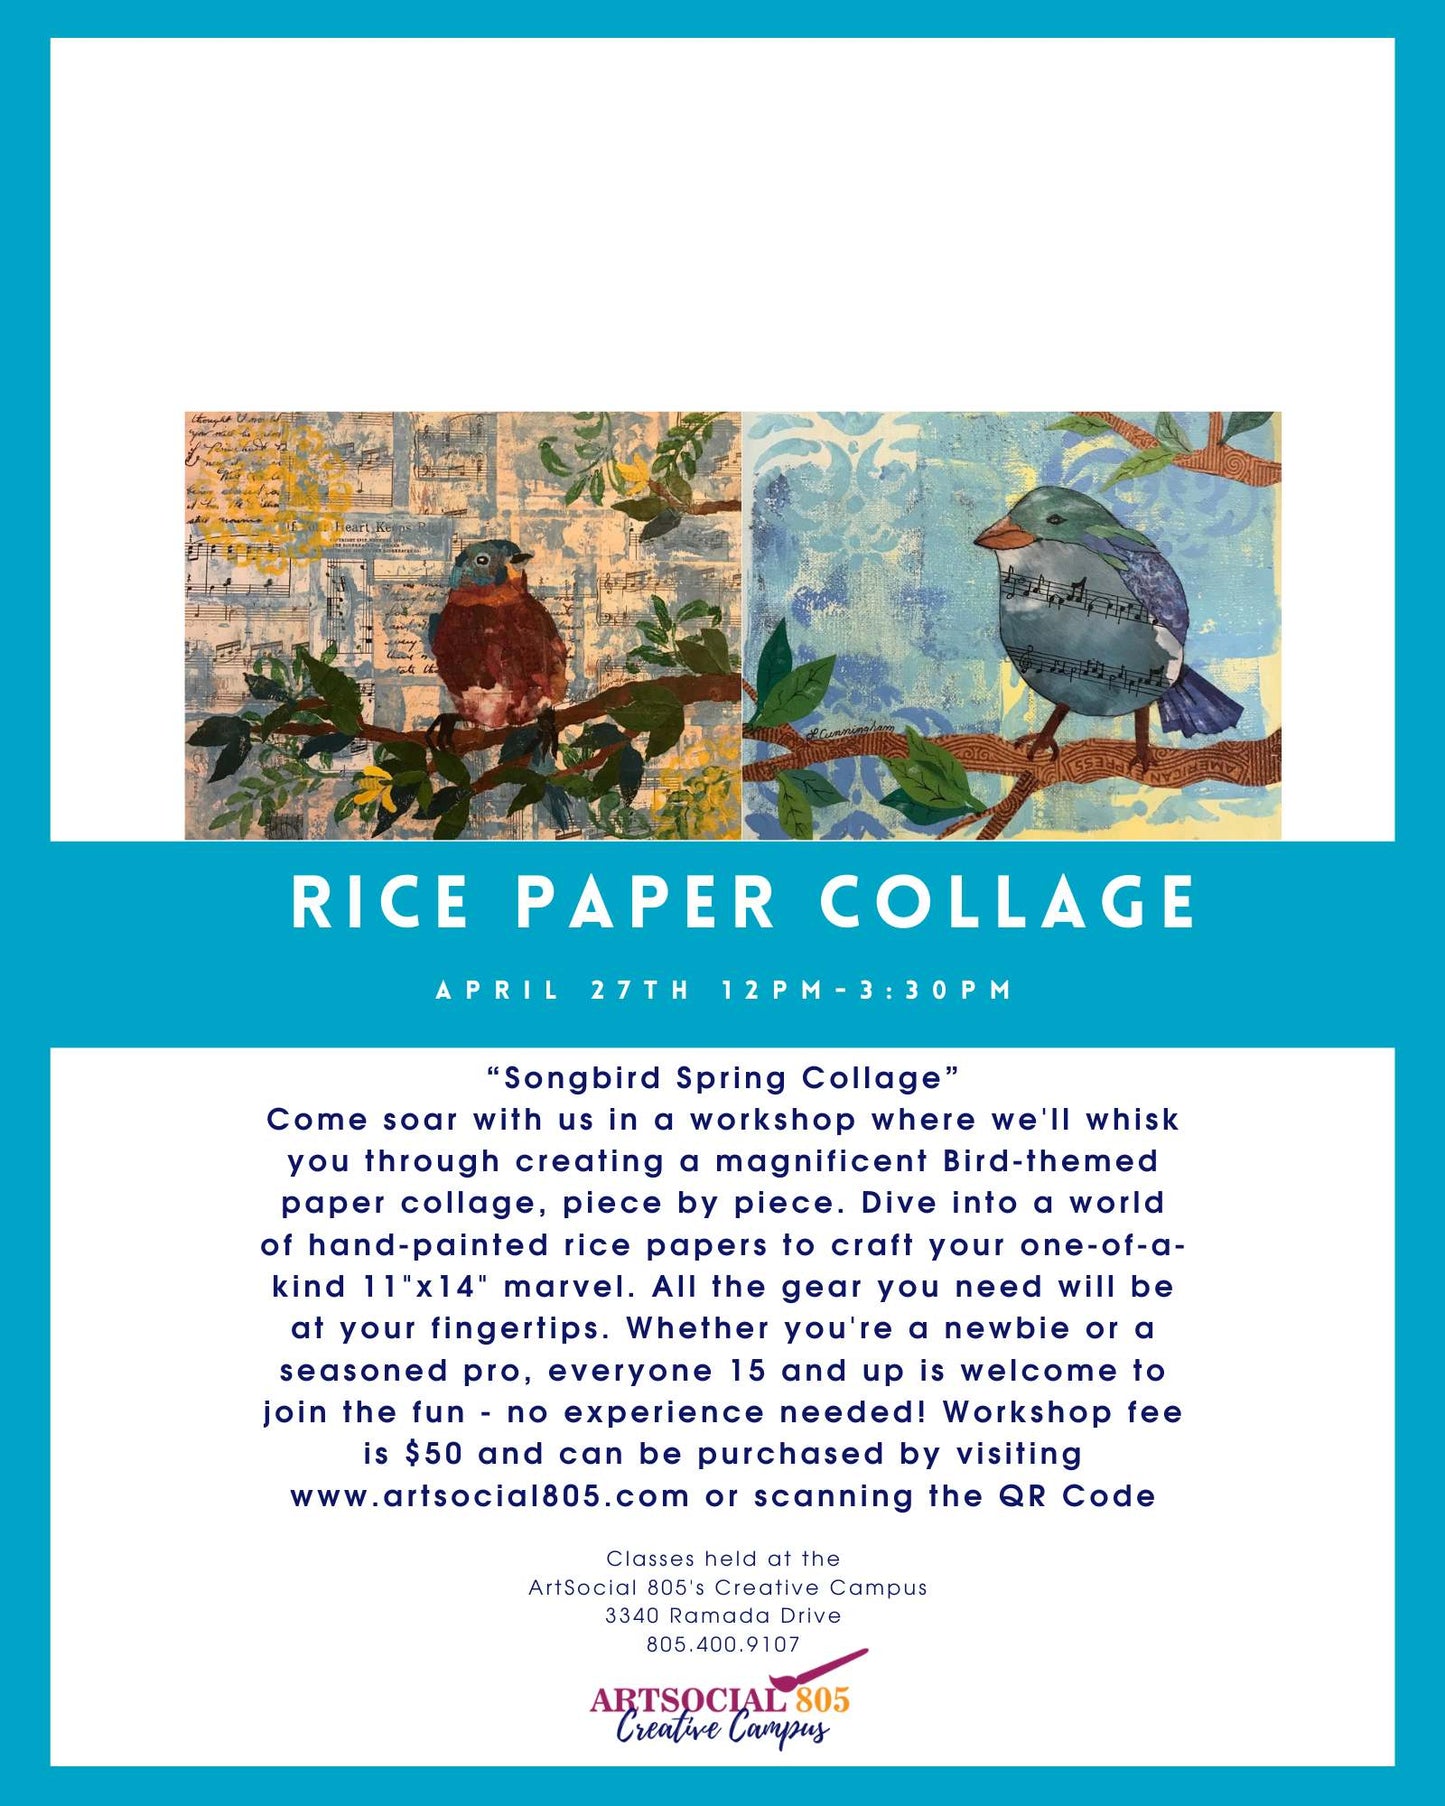 Rice Paper Workshop at the ArtSocial Creative Campus